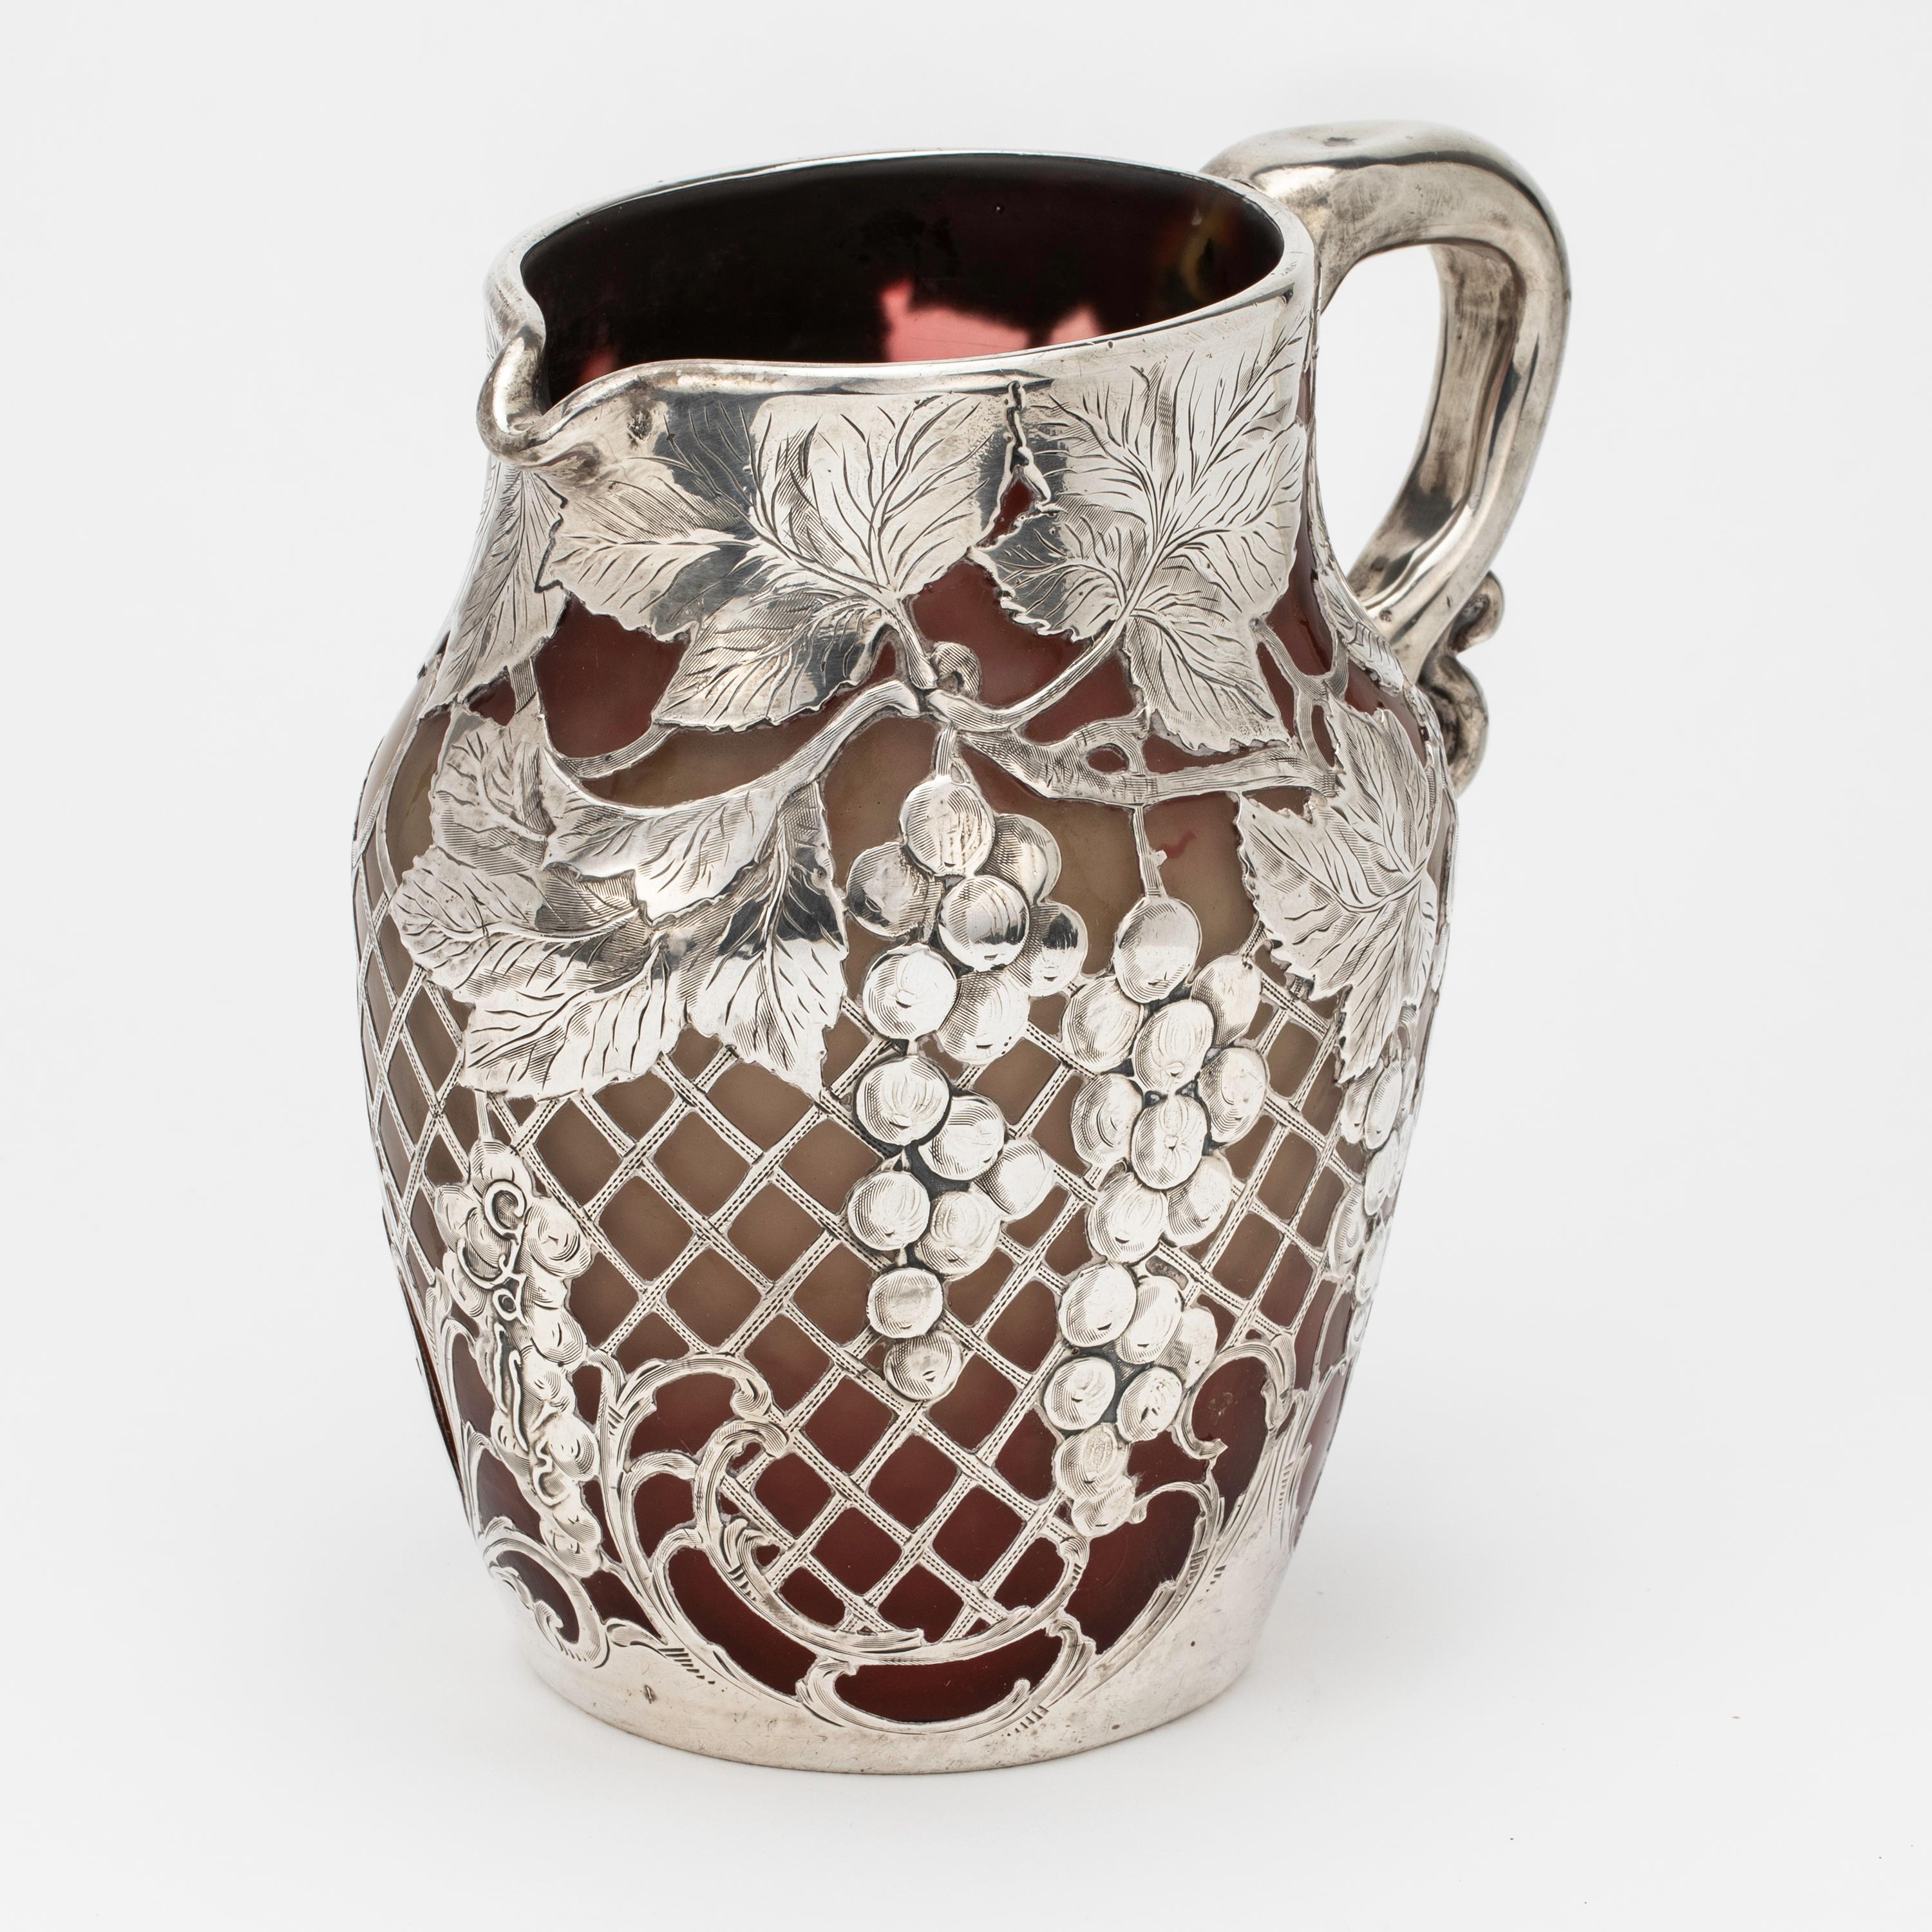 Beautiful Emile Galle glass pitcher in burgundy mottle glass, with sterling silver overlay in grape motif. Galle signature hallmark on the grape silver motif, and Alvin silver hallmark at the base of the pitcher. “ b b “ etched at the bottom of the